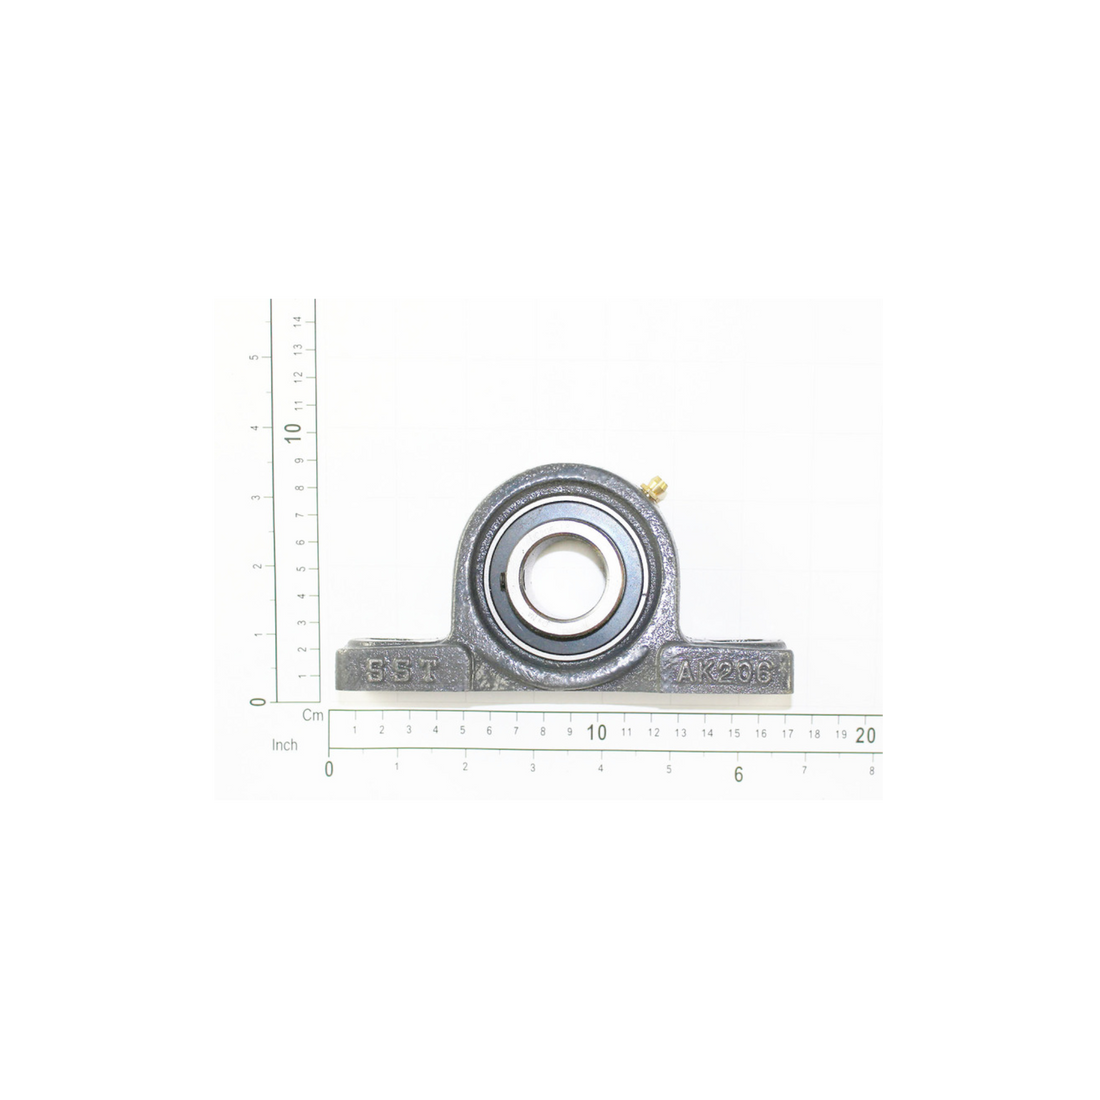 R&M Parts - Bearing, Part Number: 2307399011